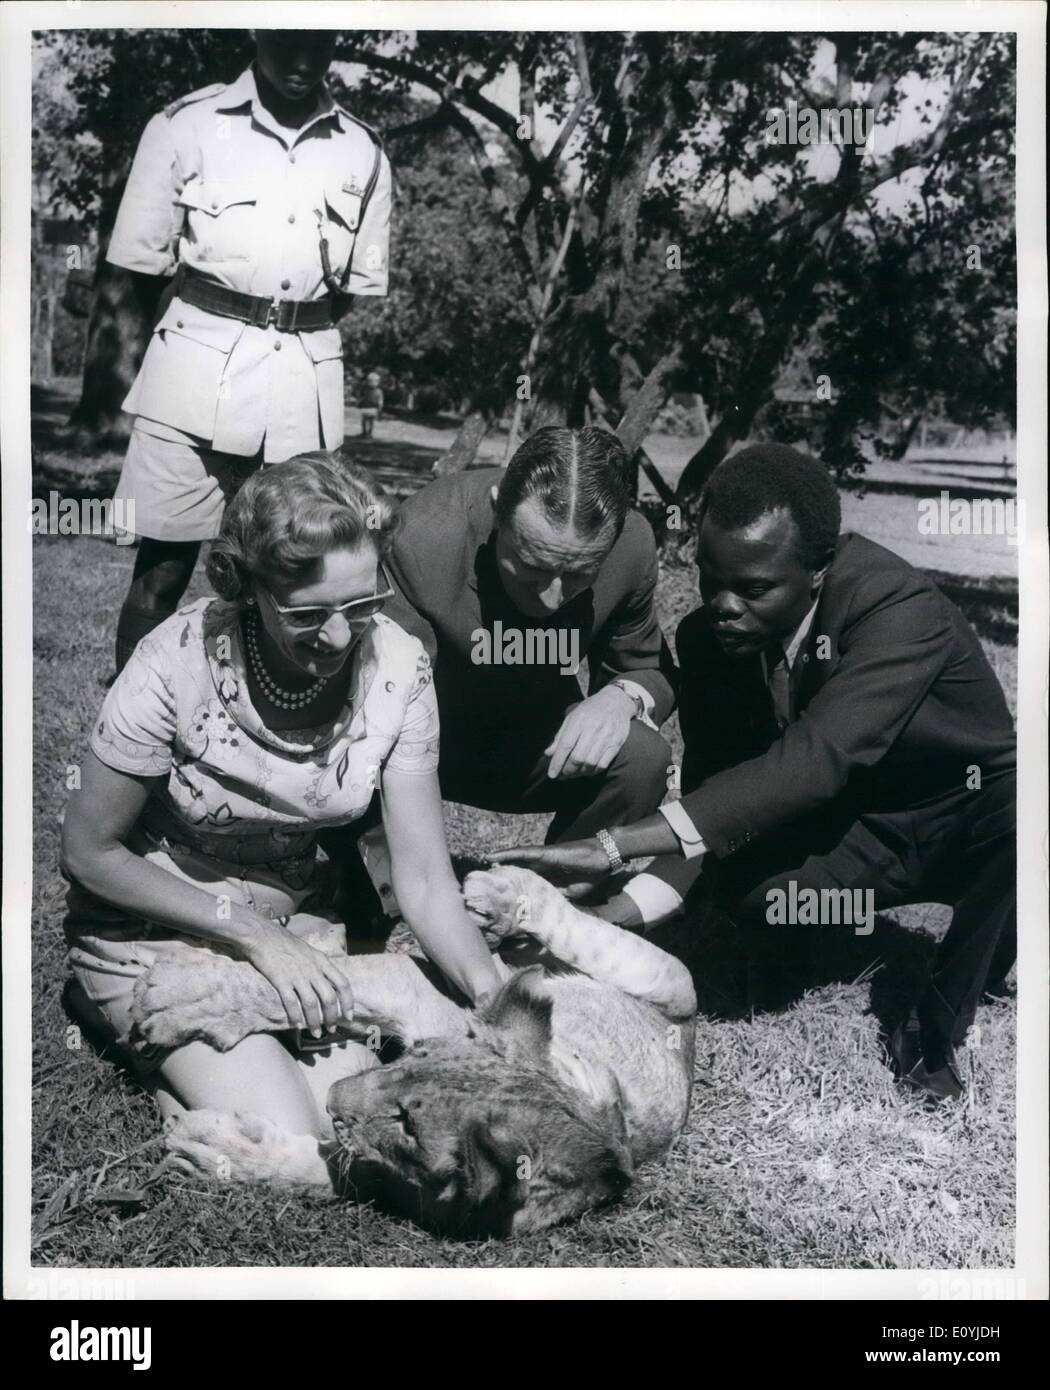 Jul. 07, 1970 - Lion Cub presented to Mr. & Mrs. Raymond C. Firestone by Kenya Government: Pictures taken at Nairobi Animal Orphanage today when a 8 month old lion was presented by the Kenya Government to Mr.Raymond C. Firestone head of the American tire company in Akron, Ohio. He in turn will donate the lion to Overtan Park Zoo in Memphis, Tennessee. The lion called Jimmy became an orphan when his mother was shot by the Kenya Game Department officials in Wajir (Northern Kenya), because she was a man-eater Stock Photo